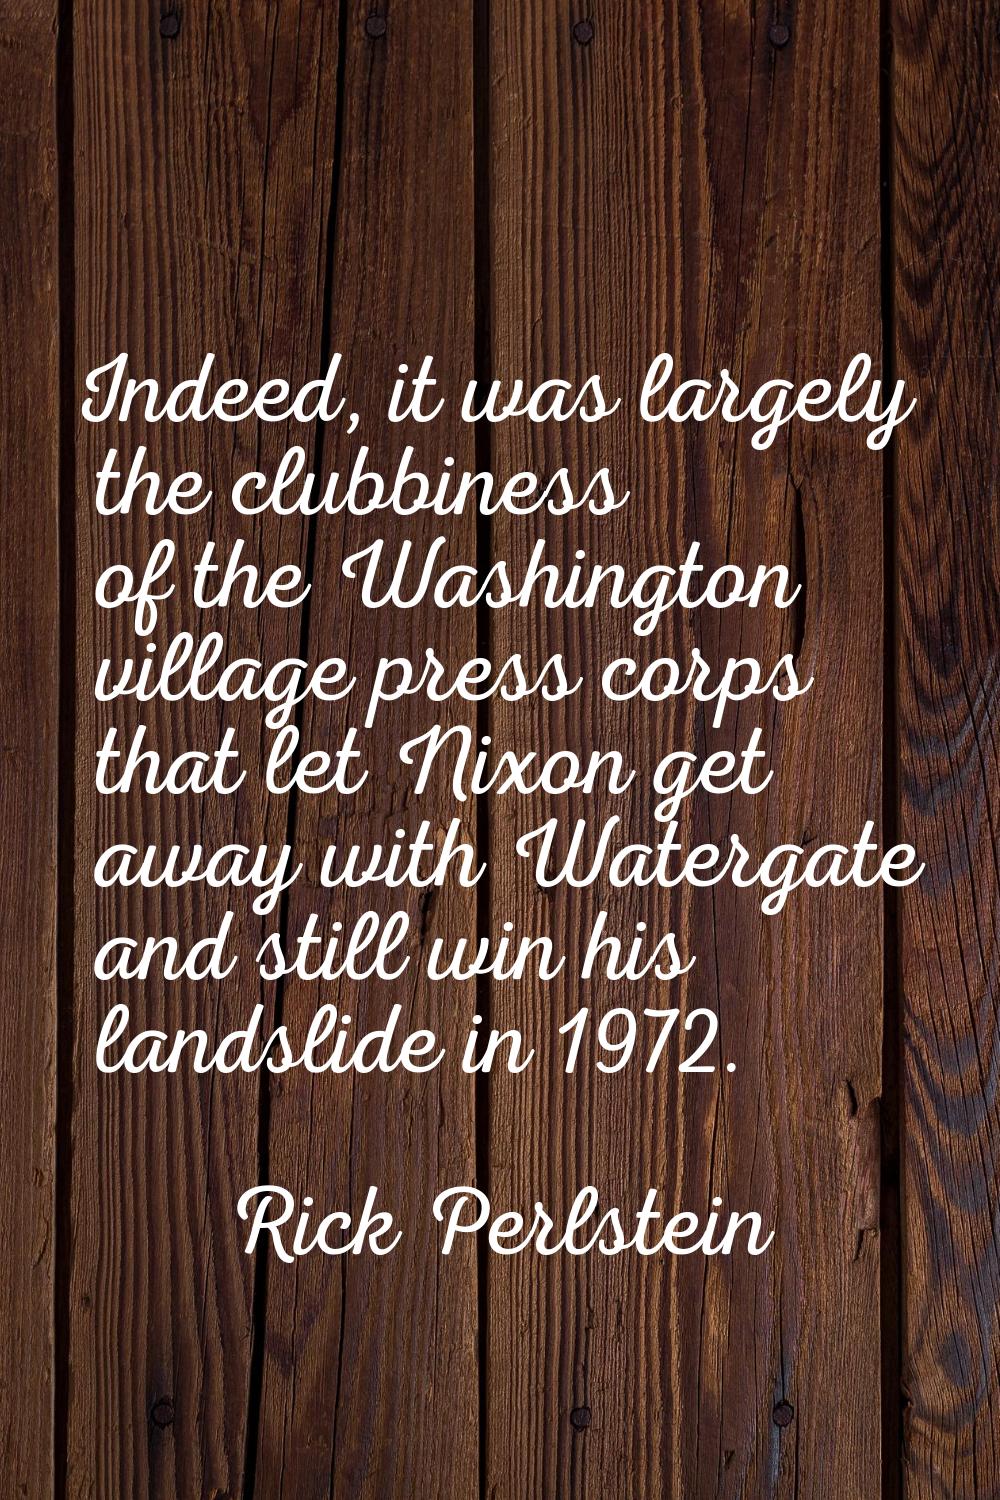 Indeed, it was largely the clubbiness of the Washington village press corps that let Nixon get away